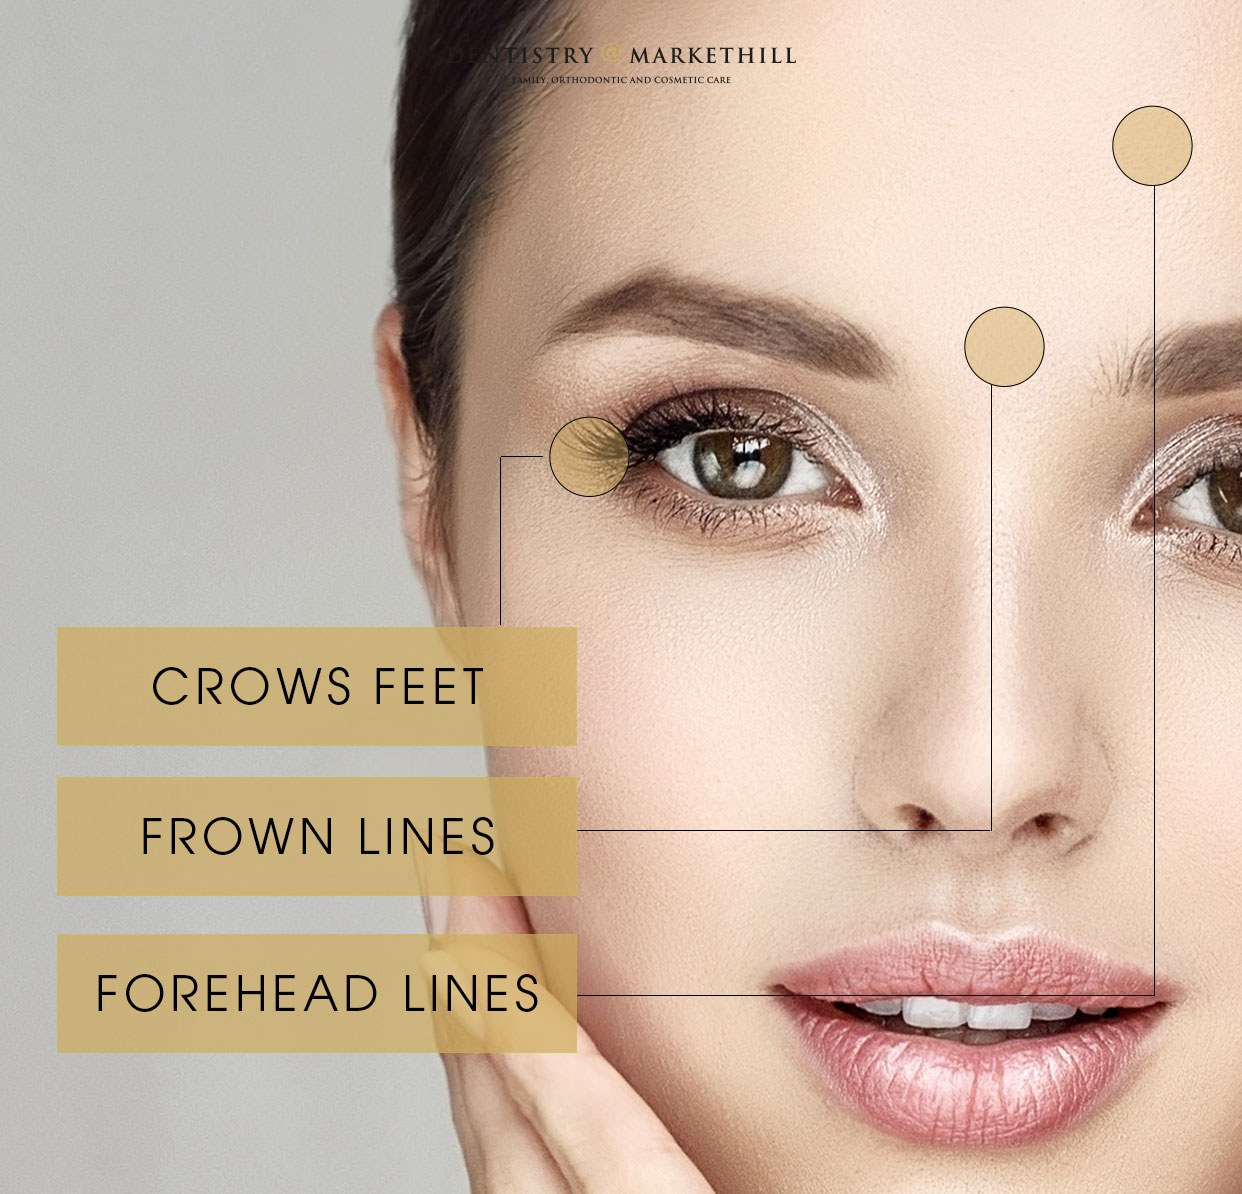 Image of facial areas which tend to wrinkle